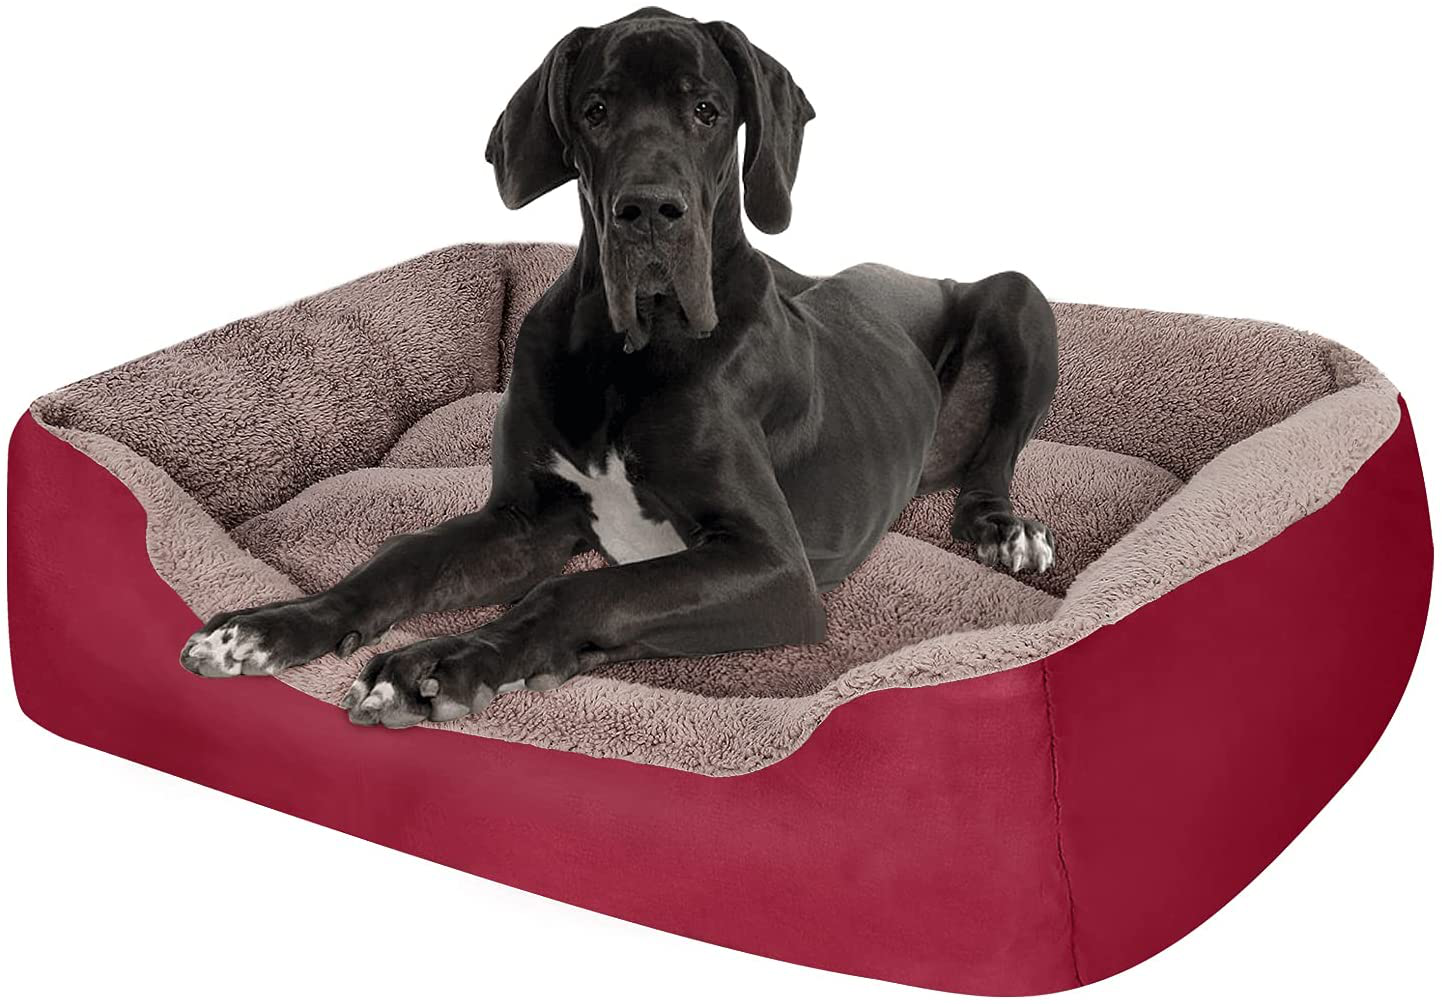 PUPPBUDD Pet Dog Bed for Medium Dogs(Xxl-Large for Large Dogs),Dog Bed with Machine Washable Comfortable and Safety for Medium and Large Dogs or Multiple Animals & Pet Supplies > Pet Supplies > Dog Supplies > Dog Beds PUPPBUDD Red XXXL-Jumbo-44''x35''x7'' 